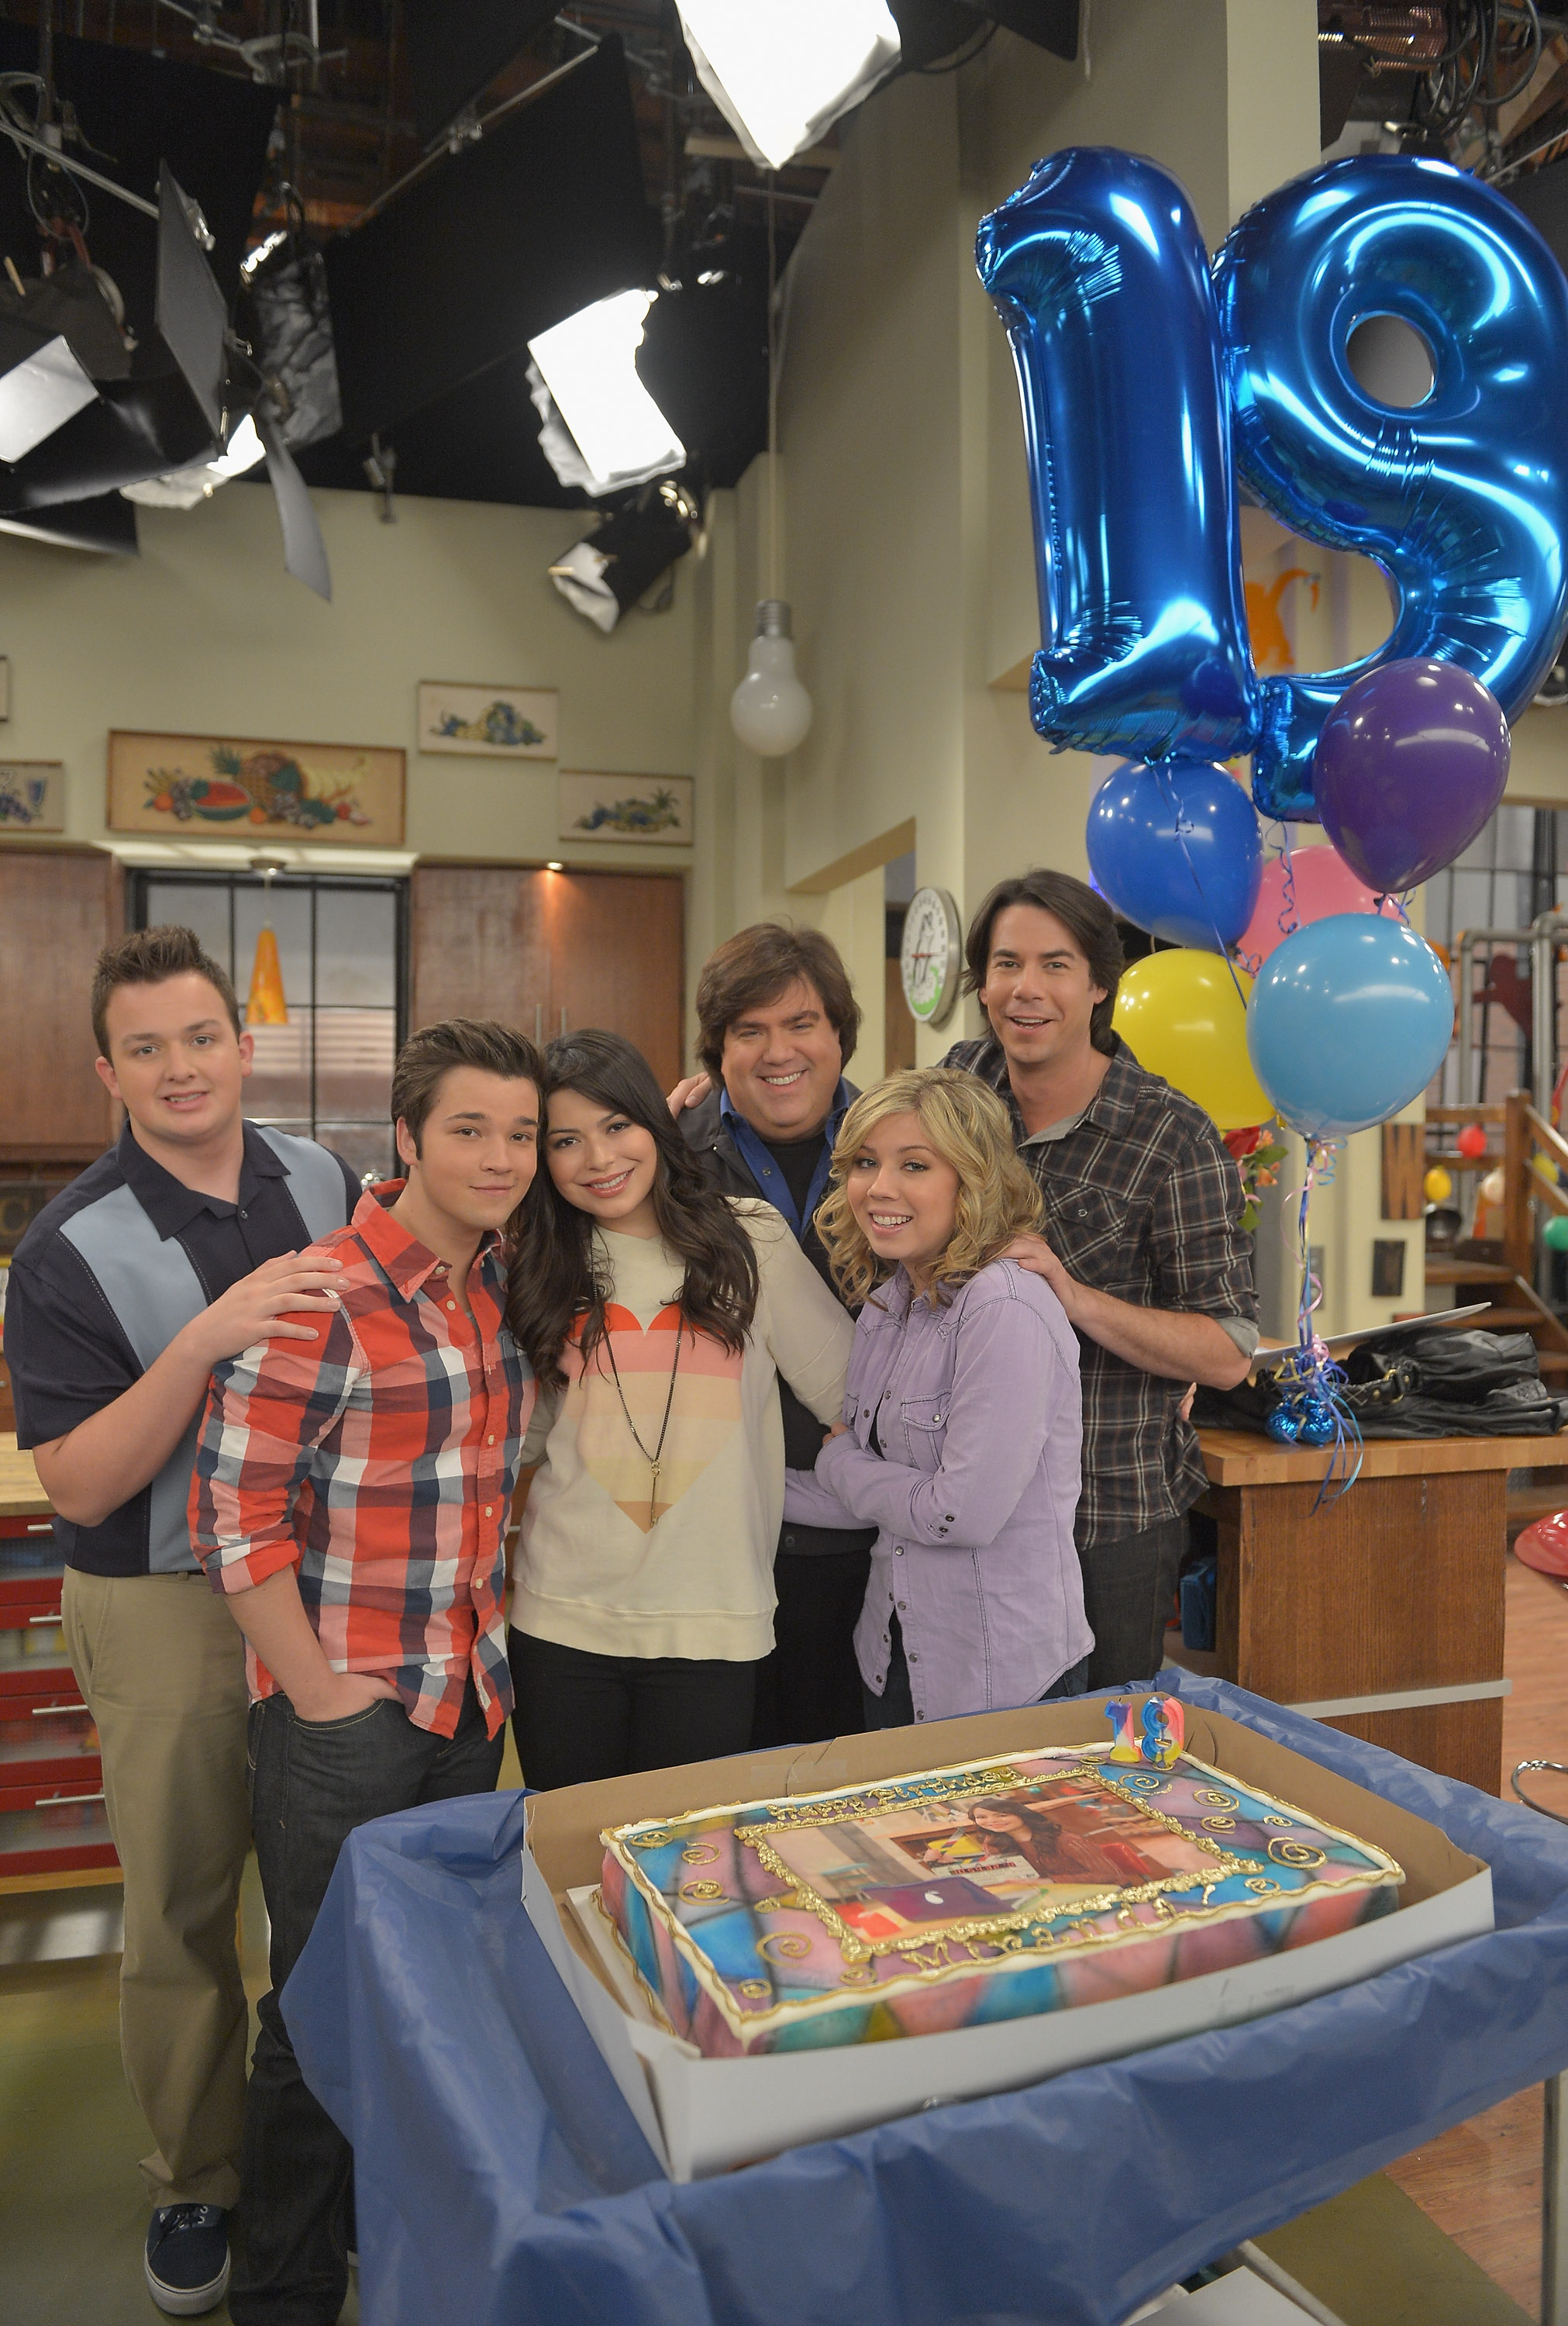 Dan Schneider (third from the right) celebrates Miranda Cosgrove's 19th birthday with the iCarly cast on set in 2012.